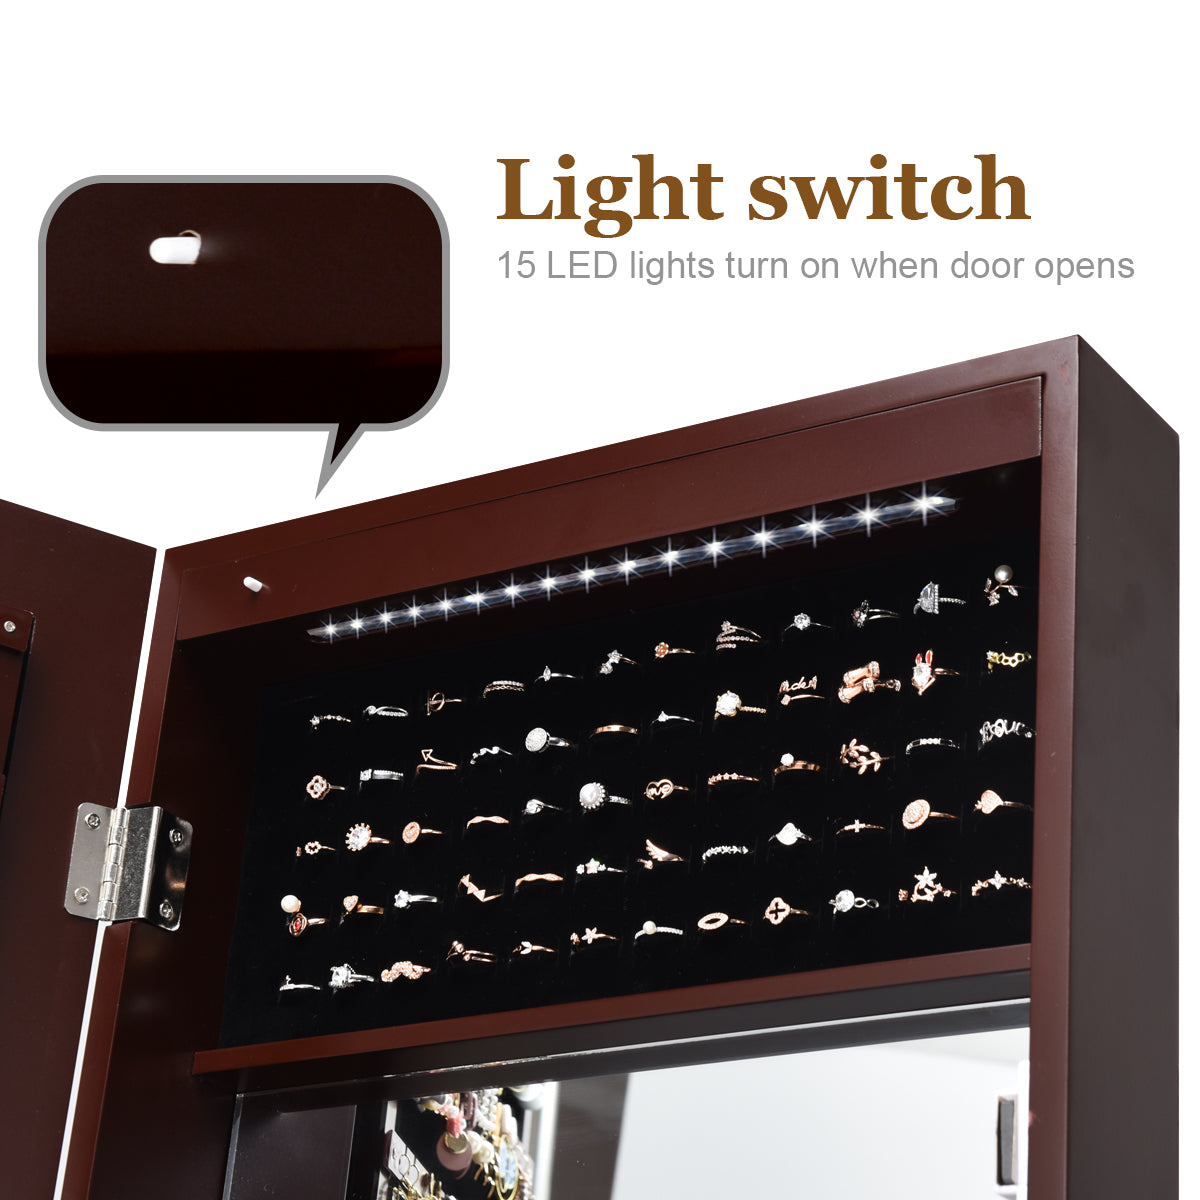  15 LEDs Wall Door Mounted Jewelry Armoire with Mirror - Giantex